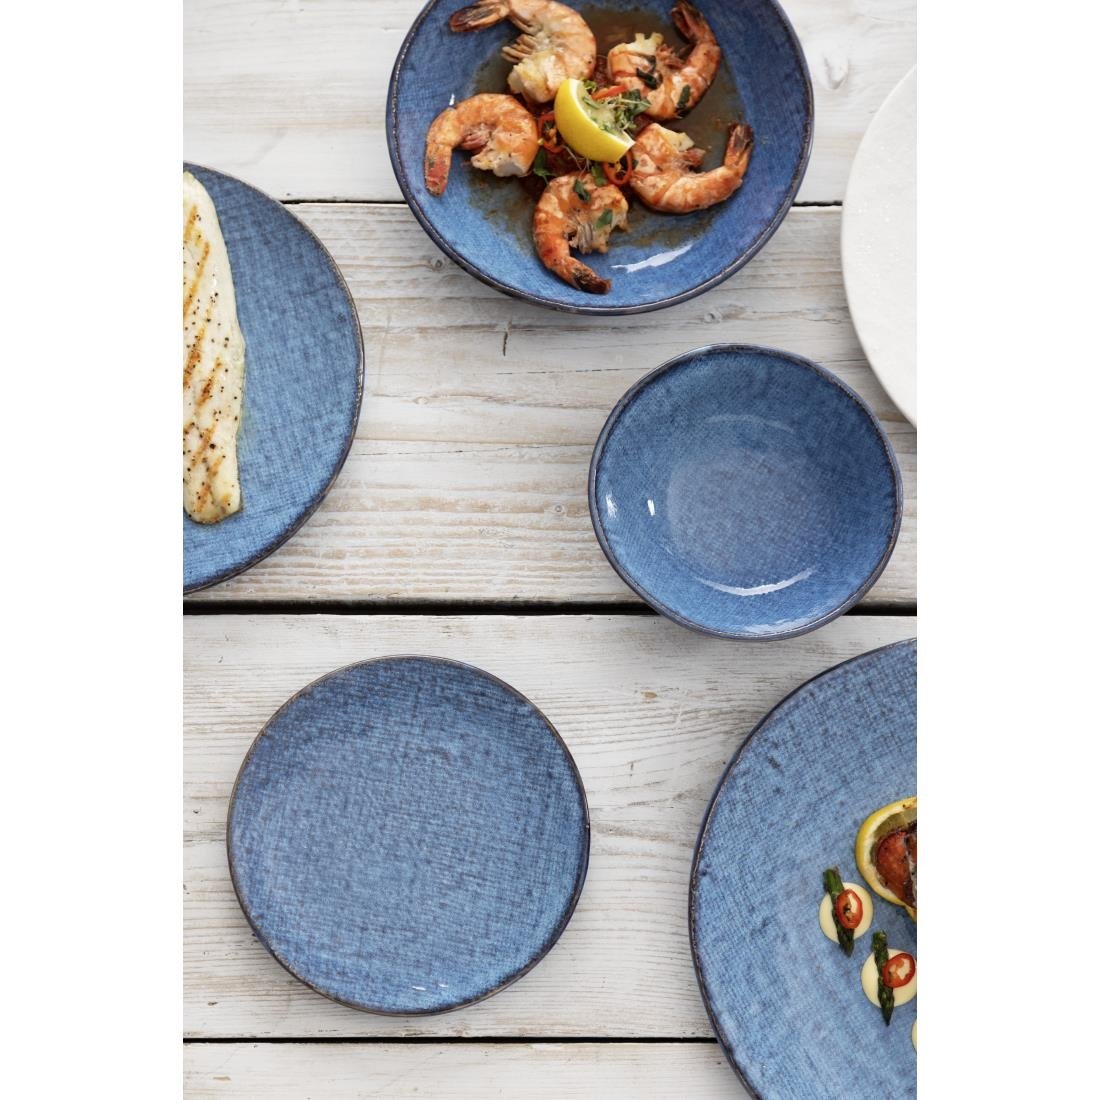 FU224 Olympia Denim Blue Coupe Bowls 160mm (Pack of 6)